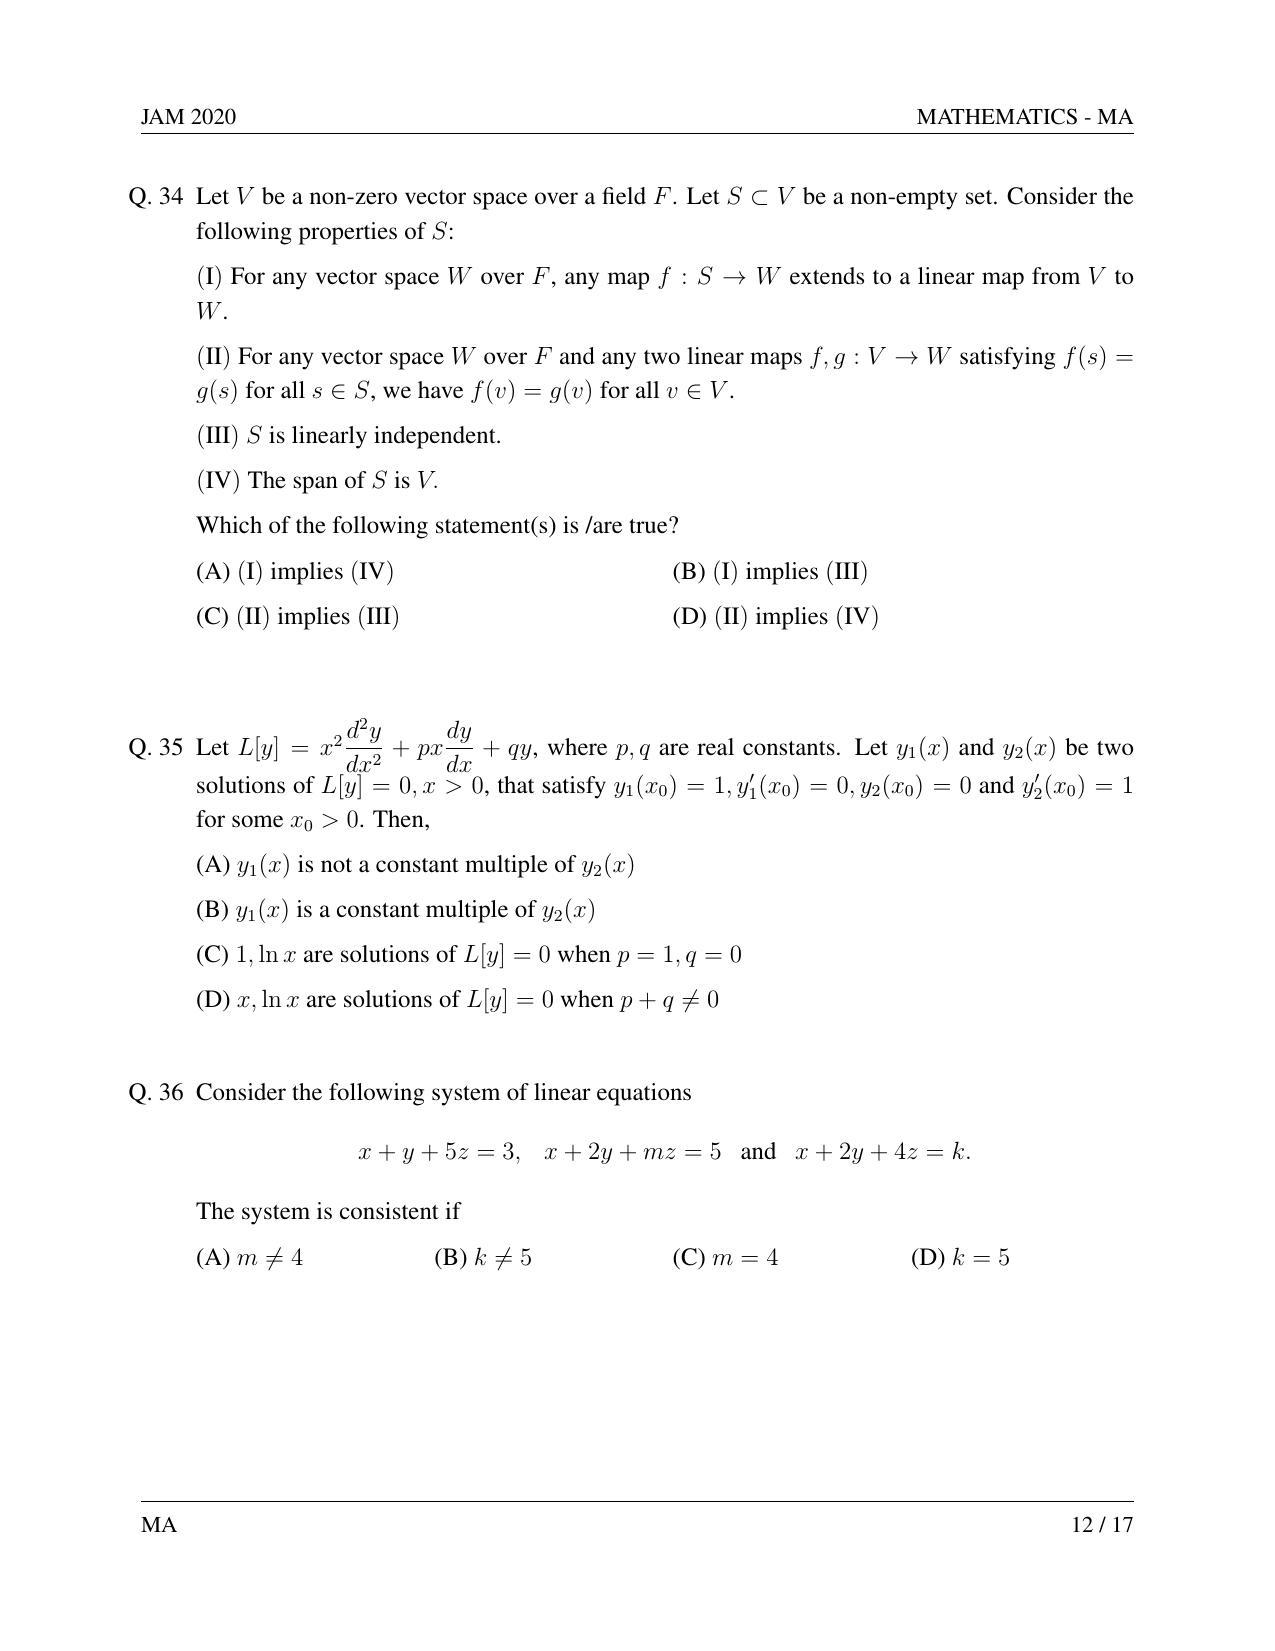 JAM 2020: MA Question Paper - Page 12